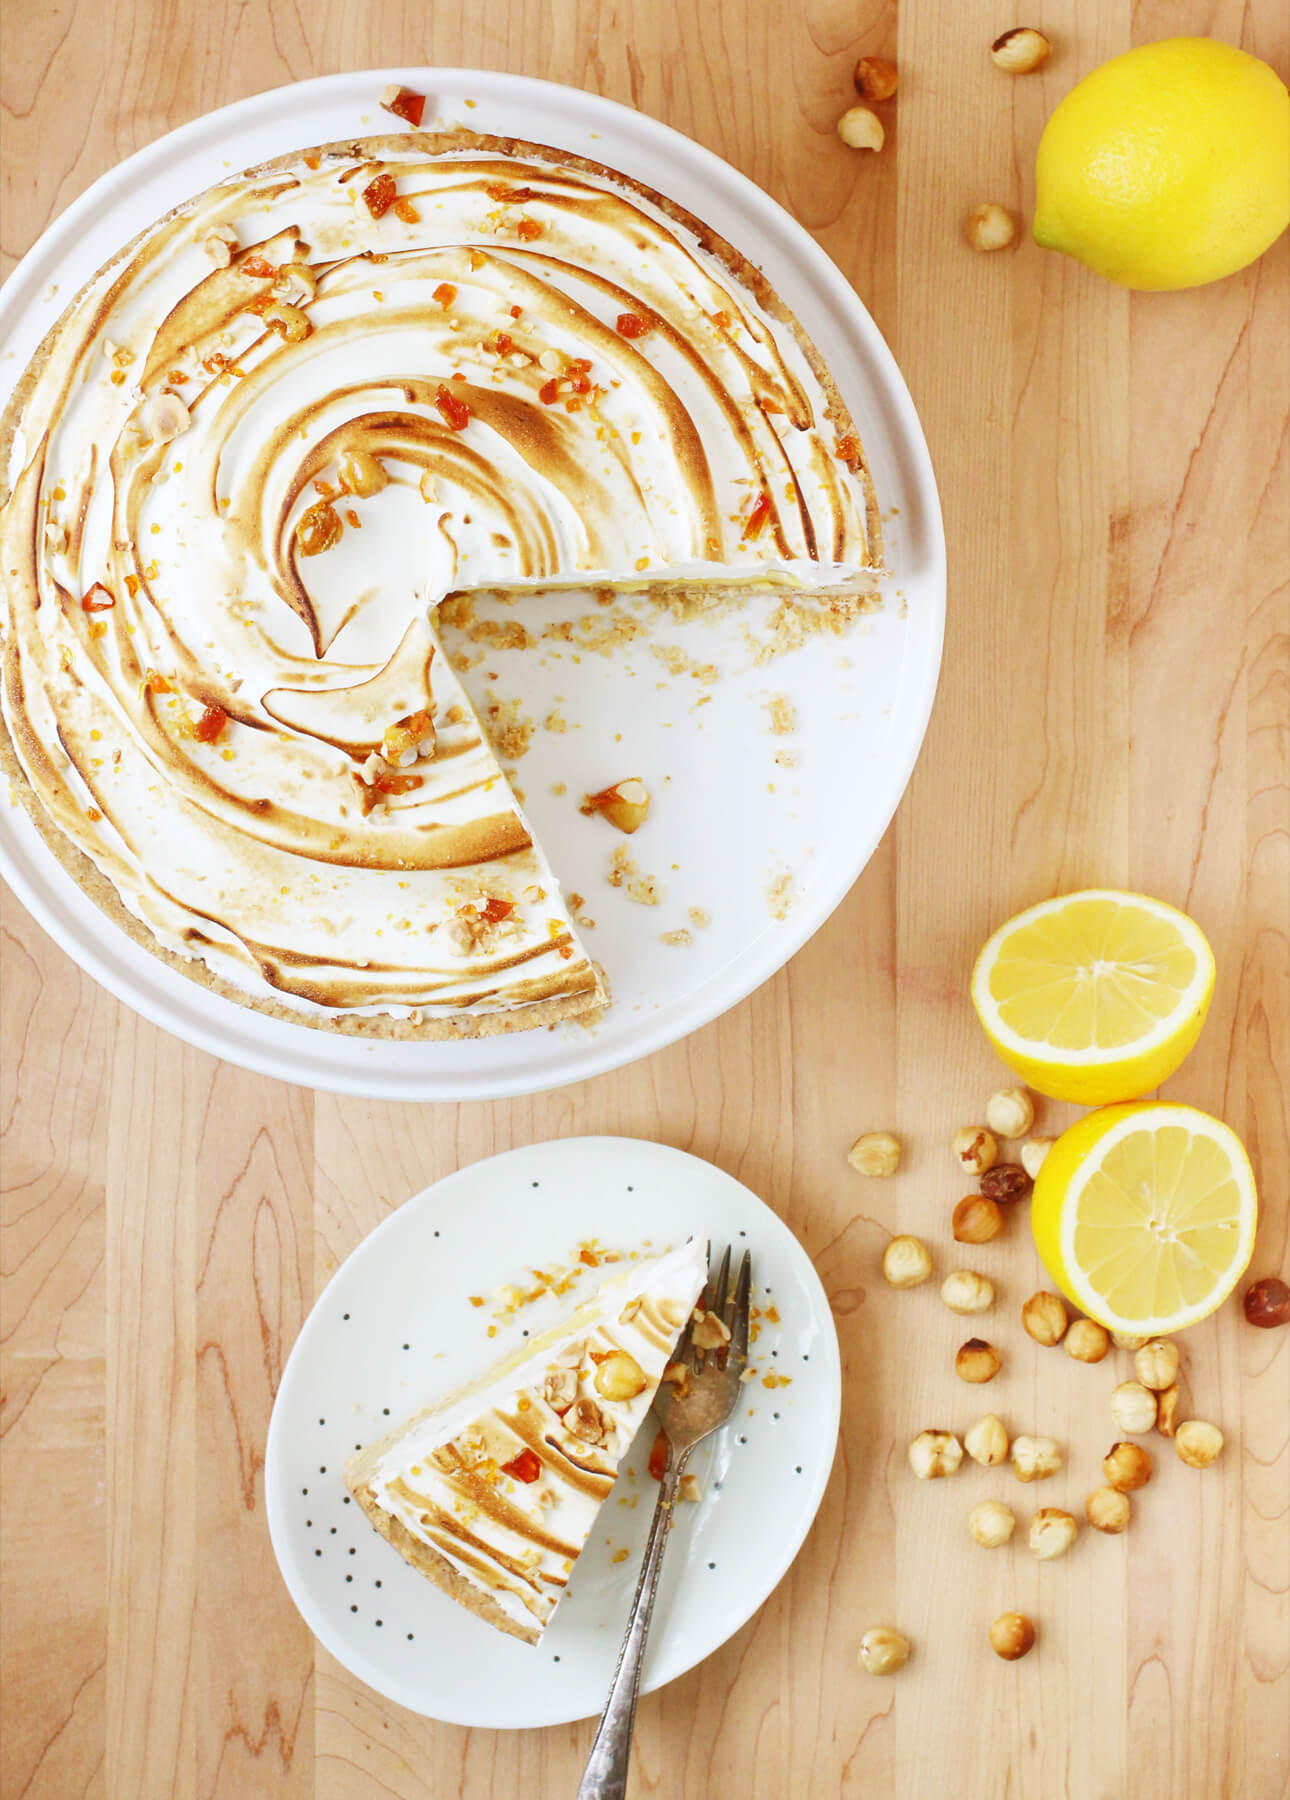 How to Make a Perfect Lemon Meringue Pie: This Lemon Meringue Pie recipe will create a truly memorable dessert: the easy, cookie-like hazelnut crust combined with the zesty filling and creamy Italian meringue will delight all fans of this classic dessert. Helpful tips and how-to video included! // FoodNouveau.com